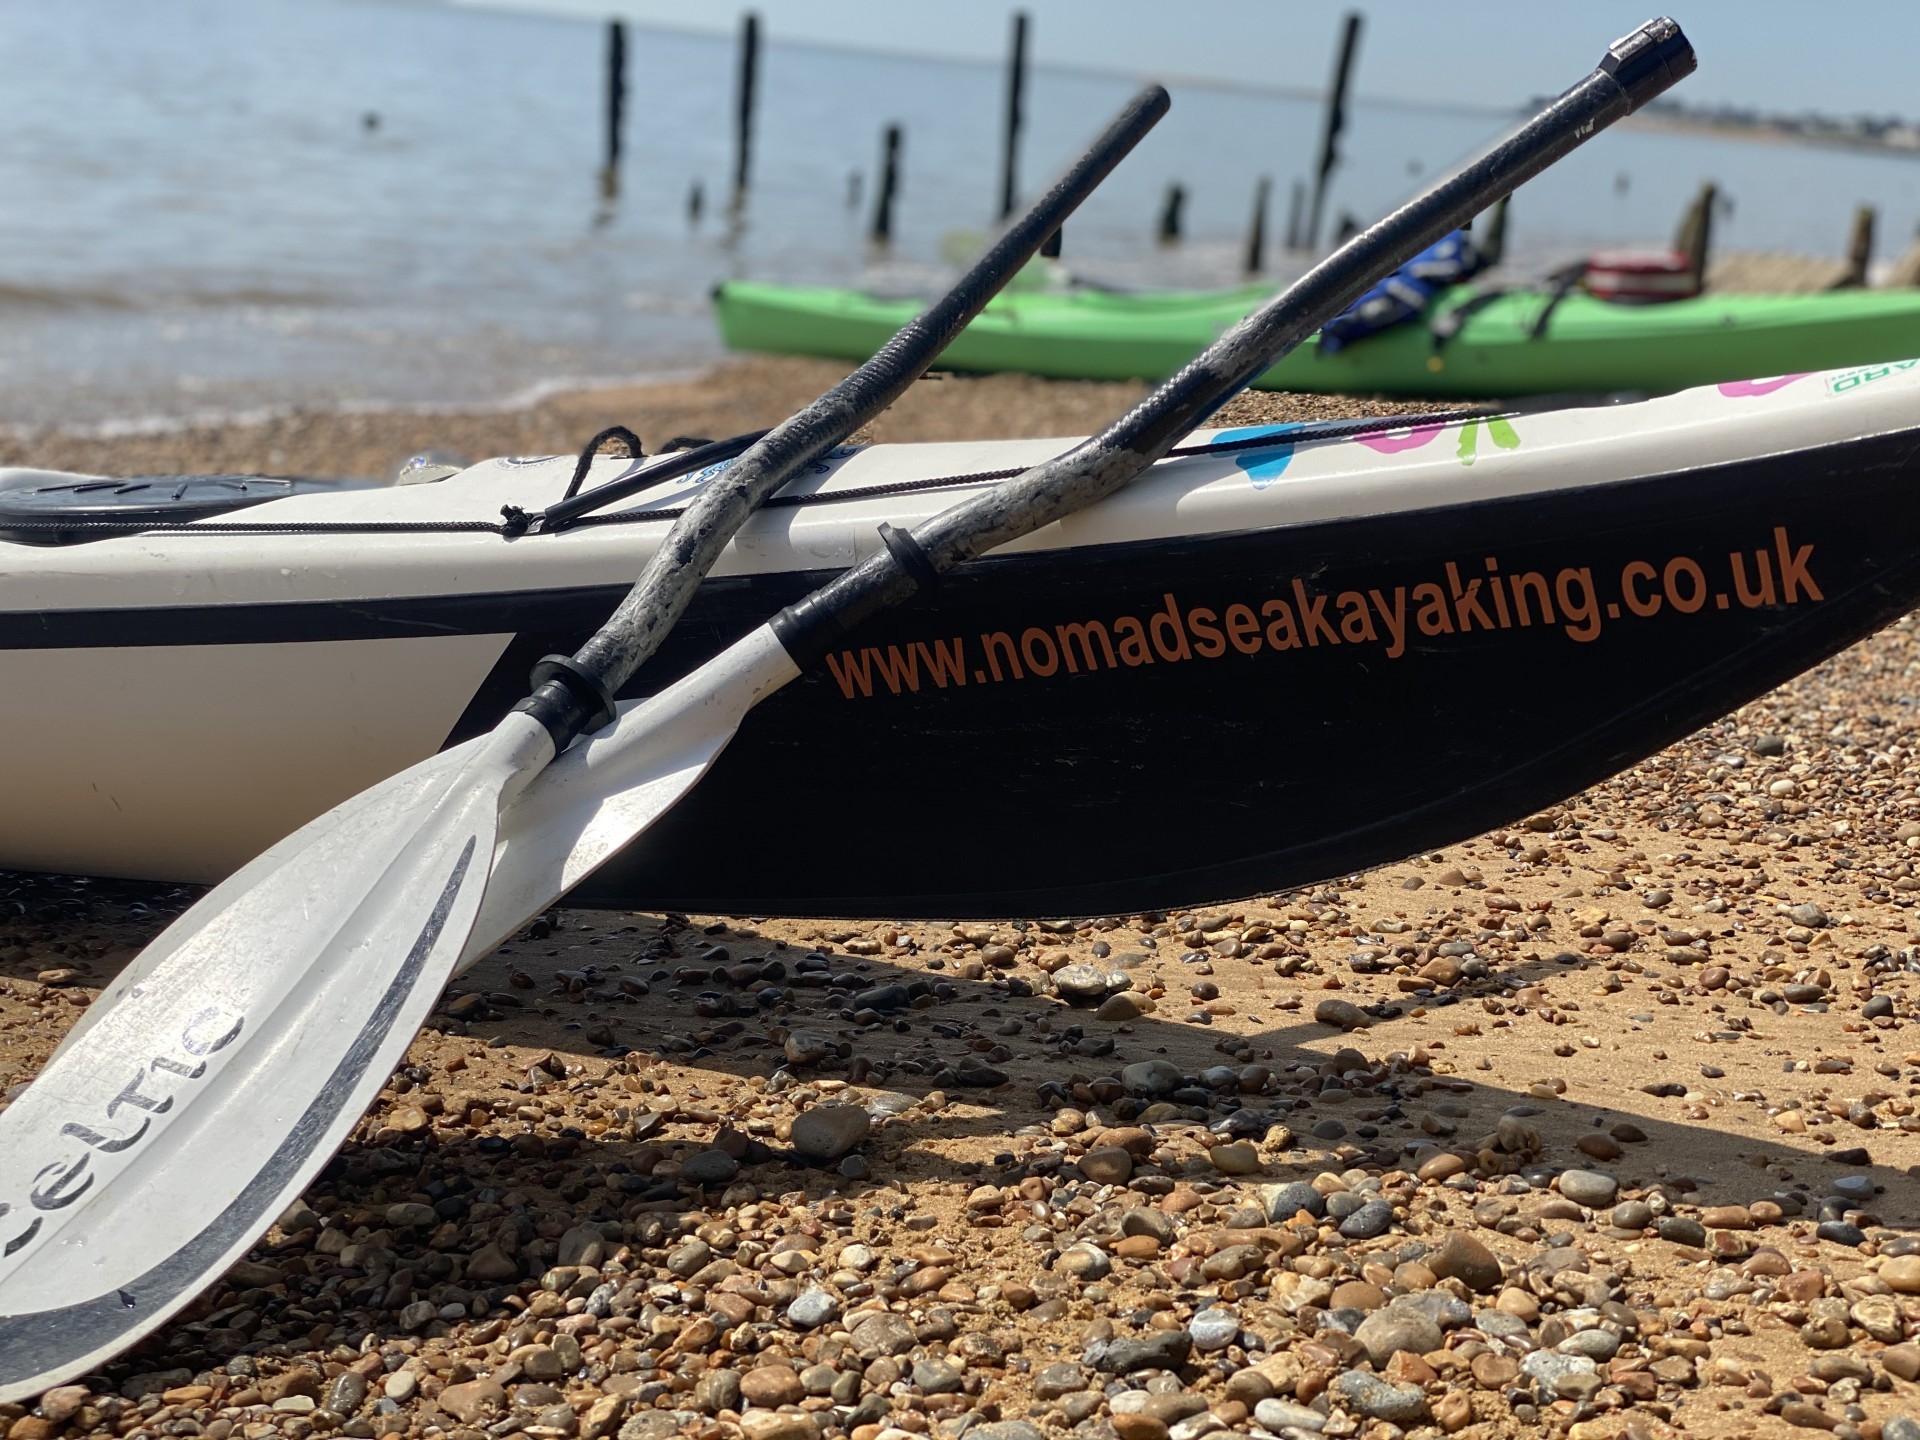 A white Celtic paddle split in two & resting on a sea kayak with another sea kayak in the background